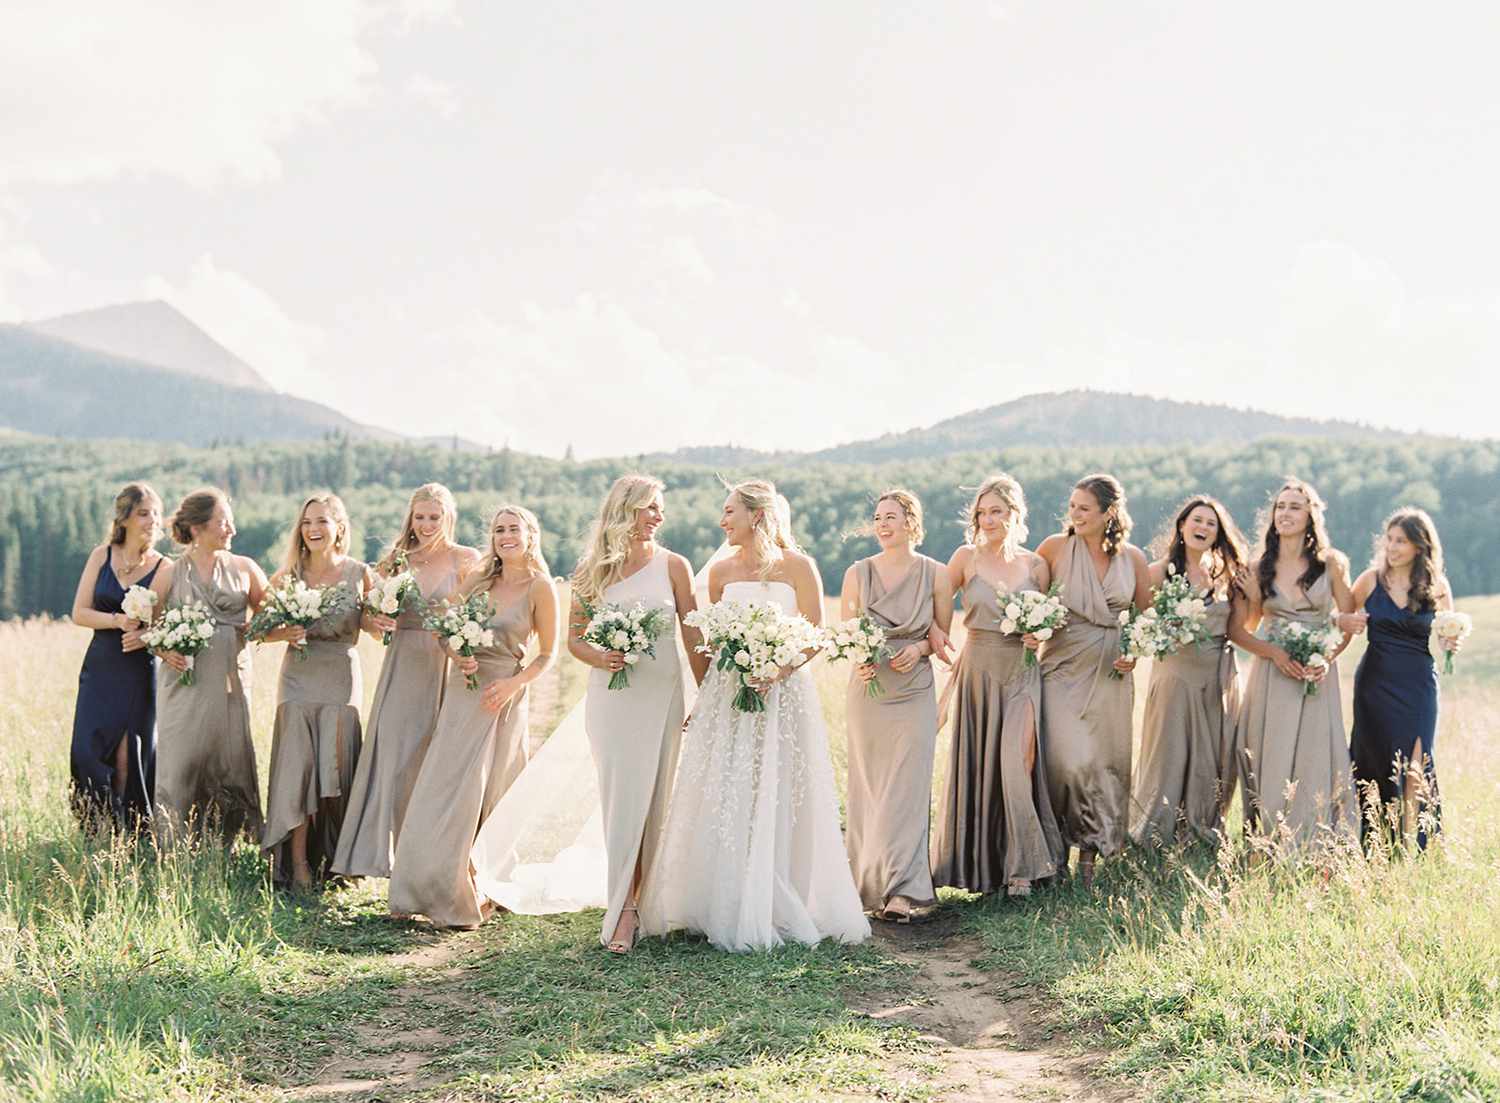 bride walking with large bridal party wearing beige bridesmaids dresses